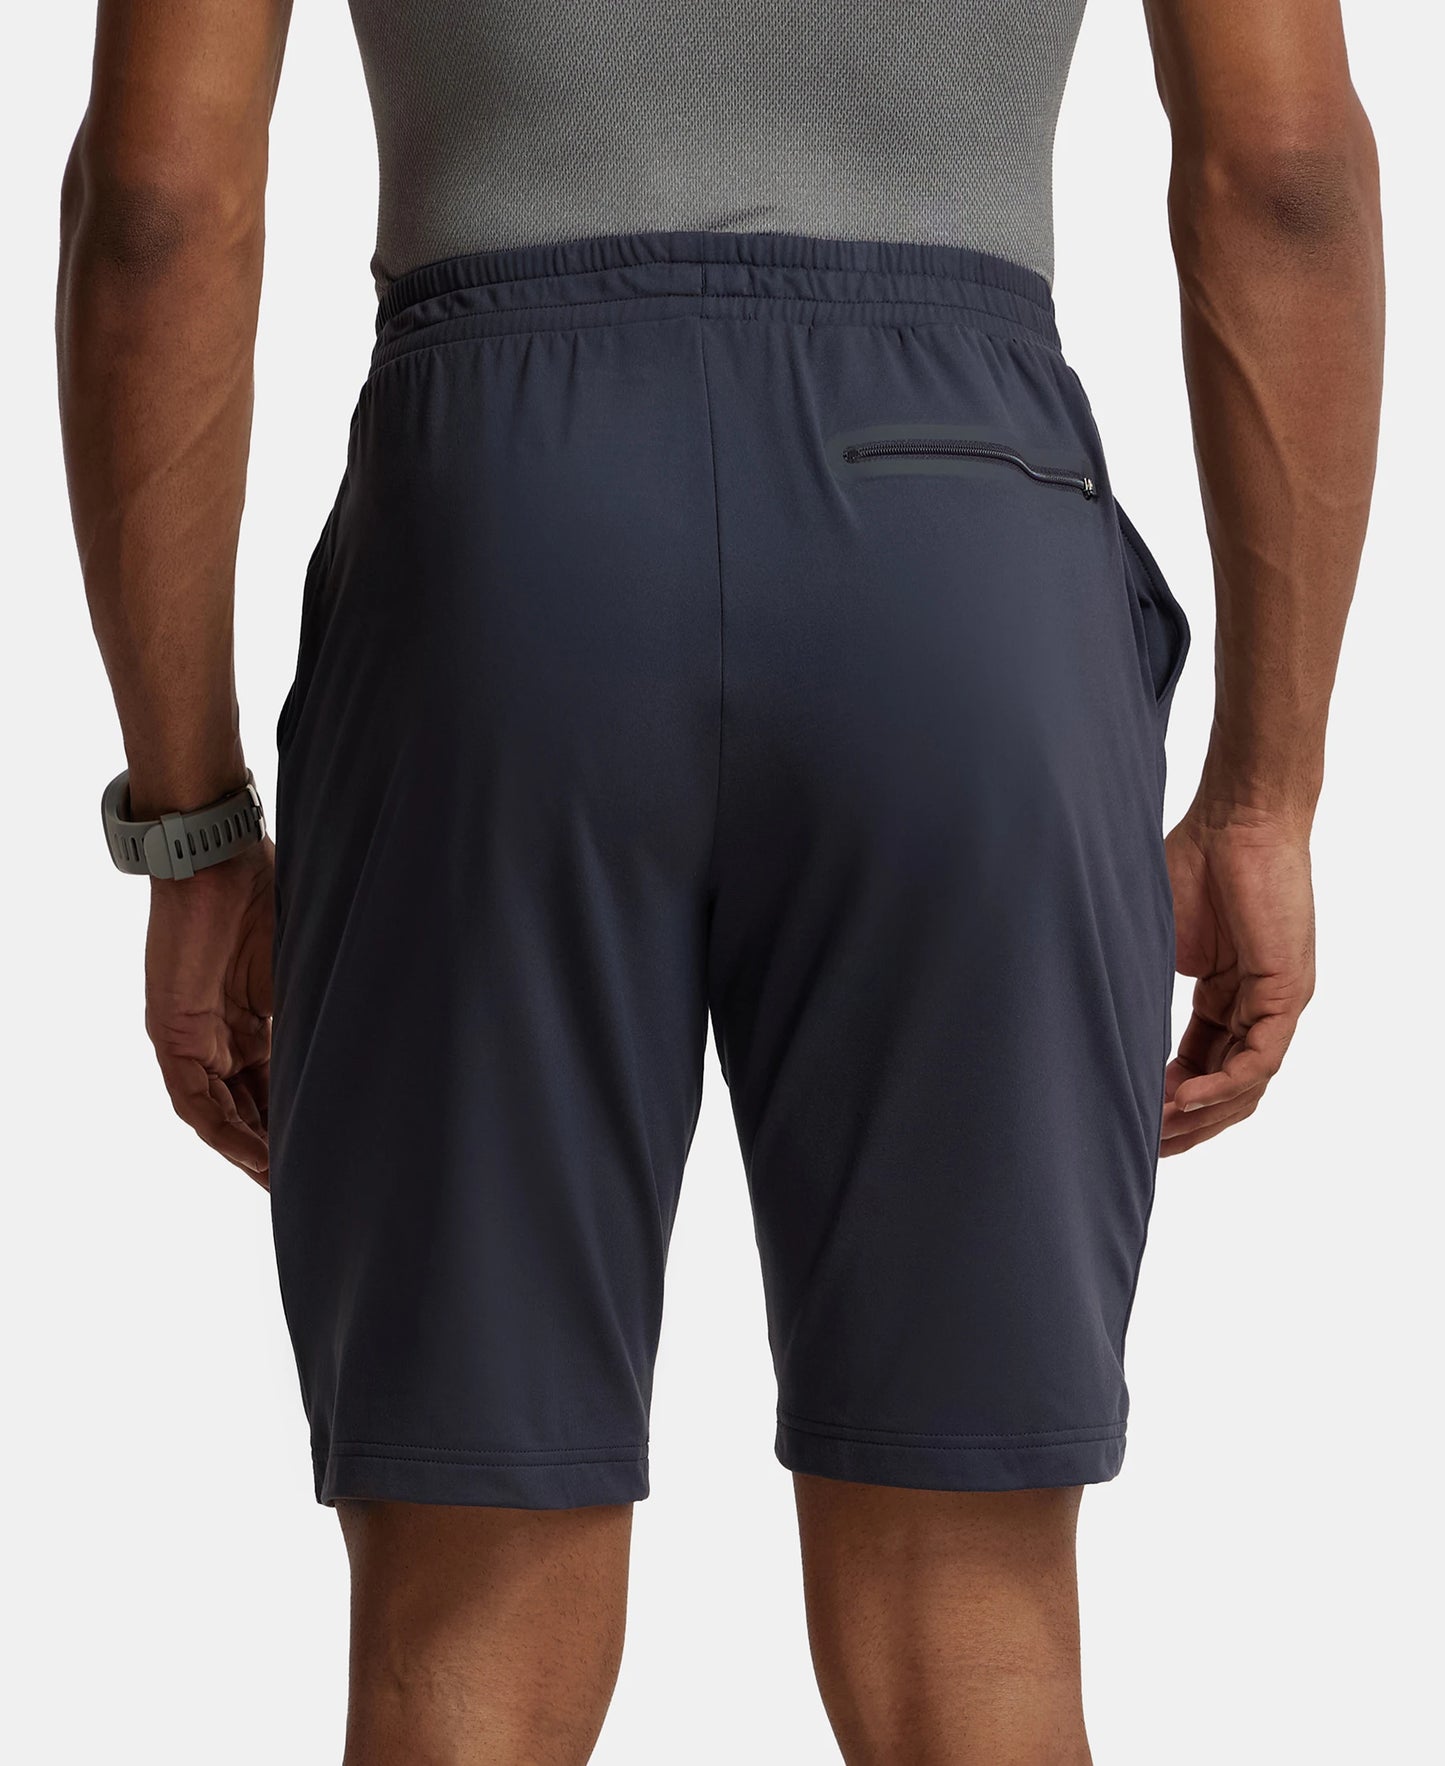 Soft Touch Microfiber Elastane Stretch Shorts with Back Zipper Pocket and StayFresh Treatment - Graphite-3